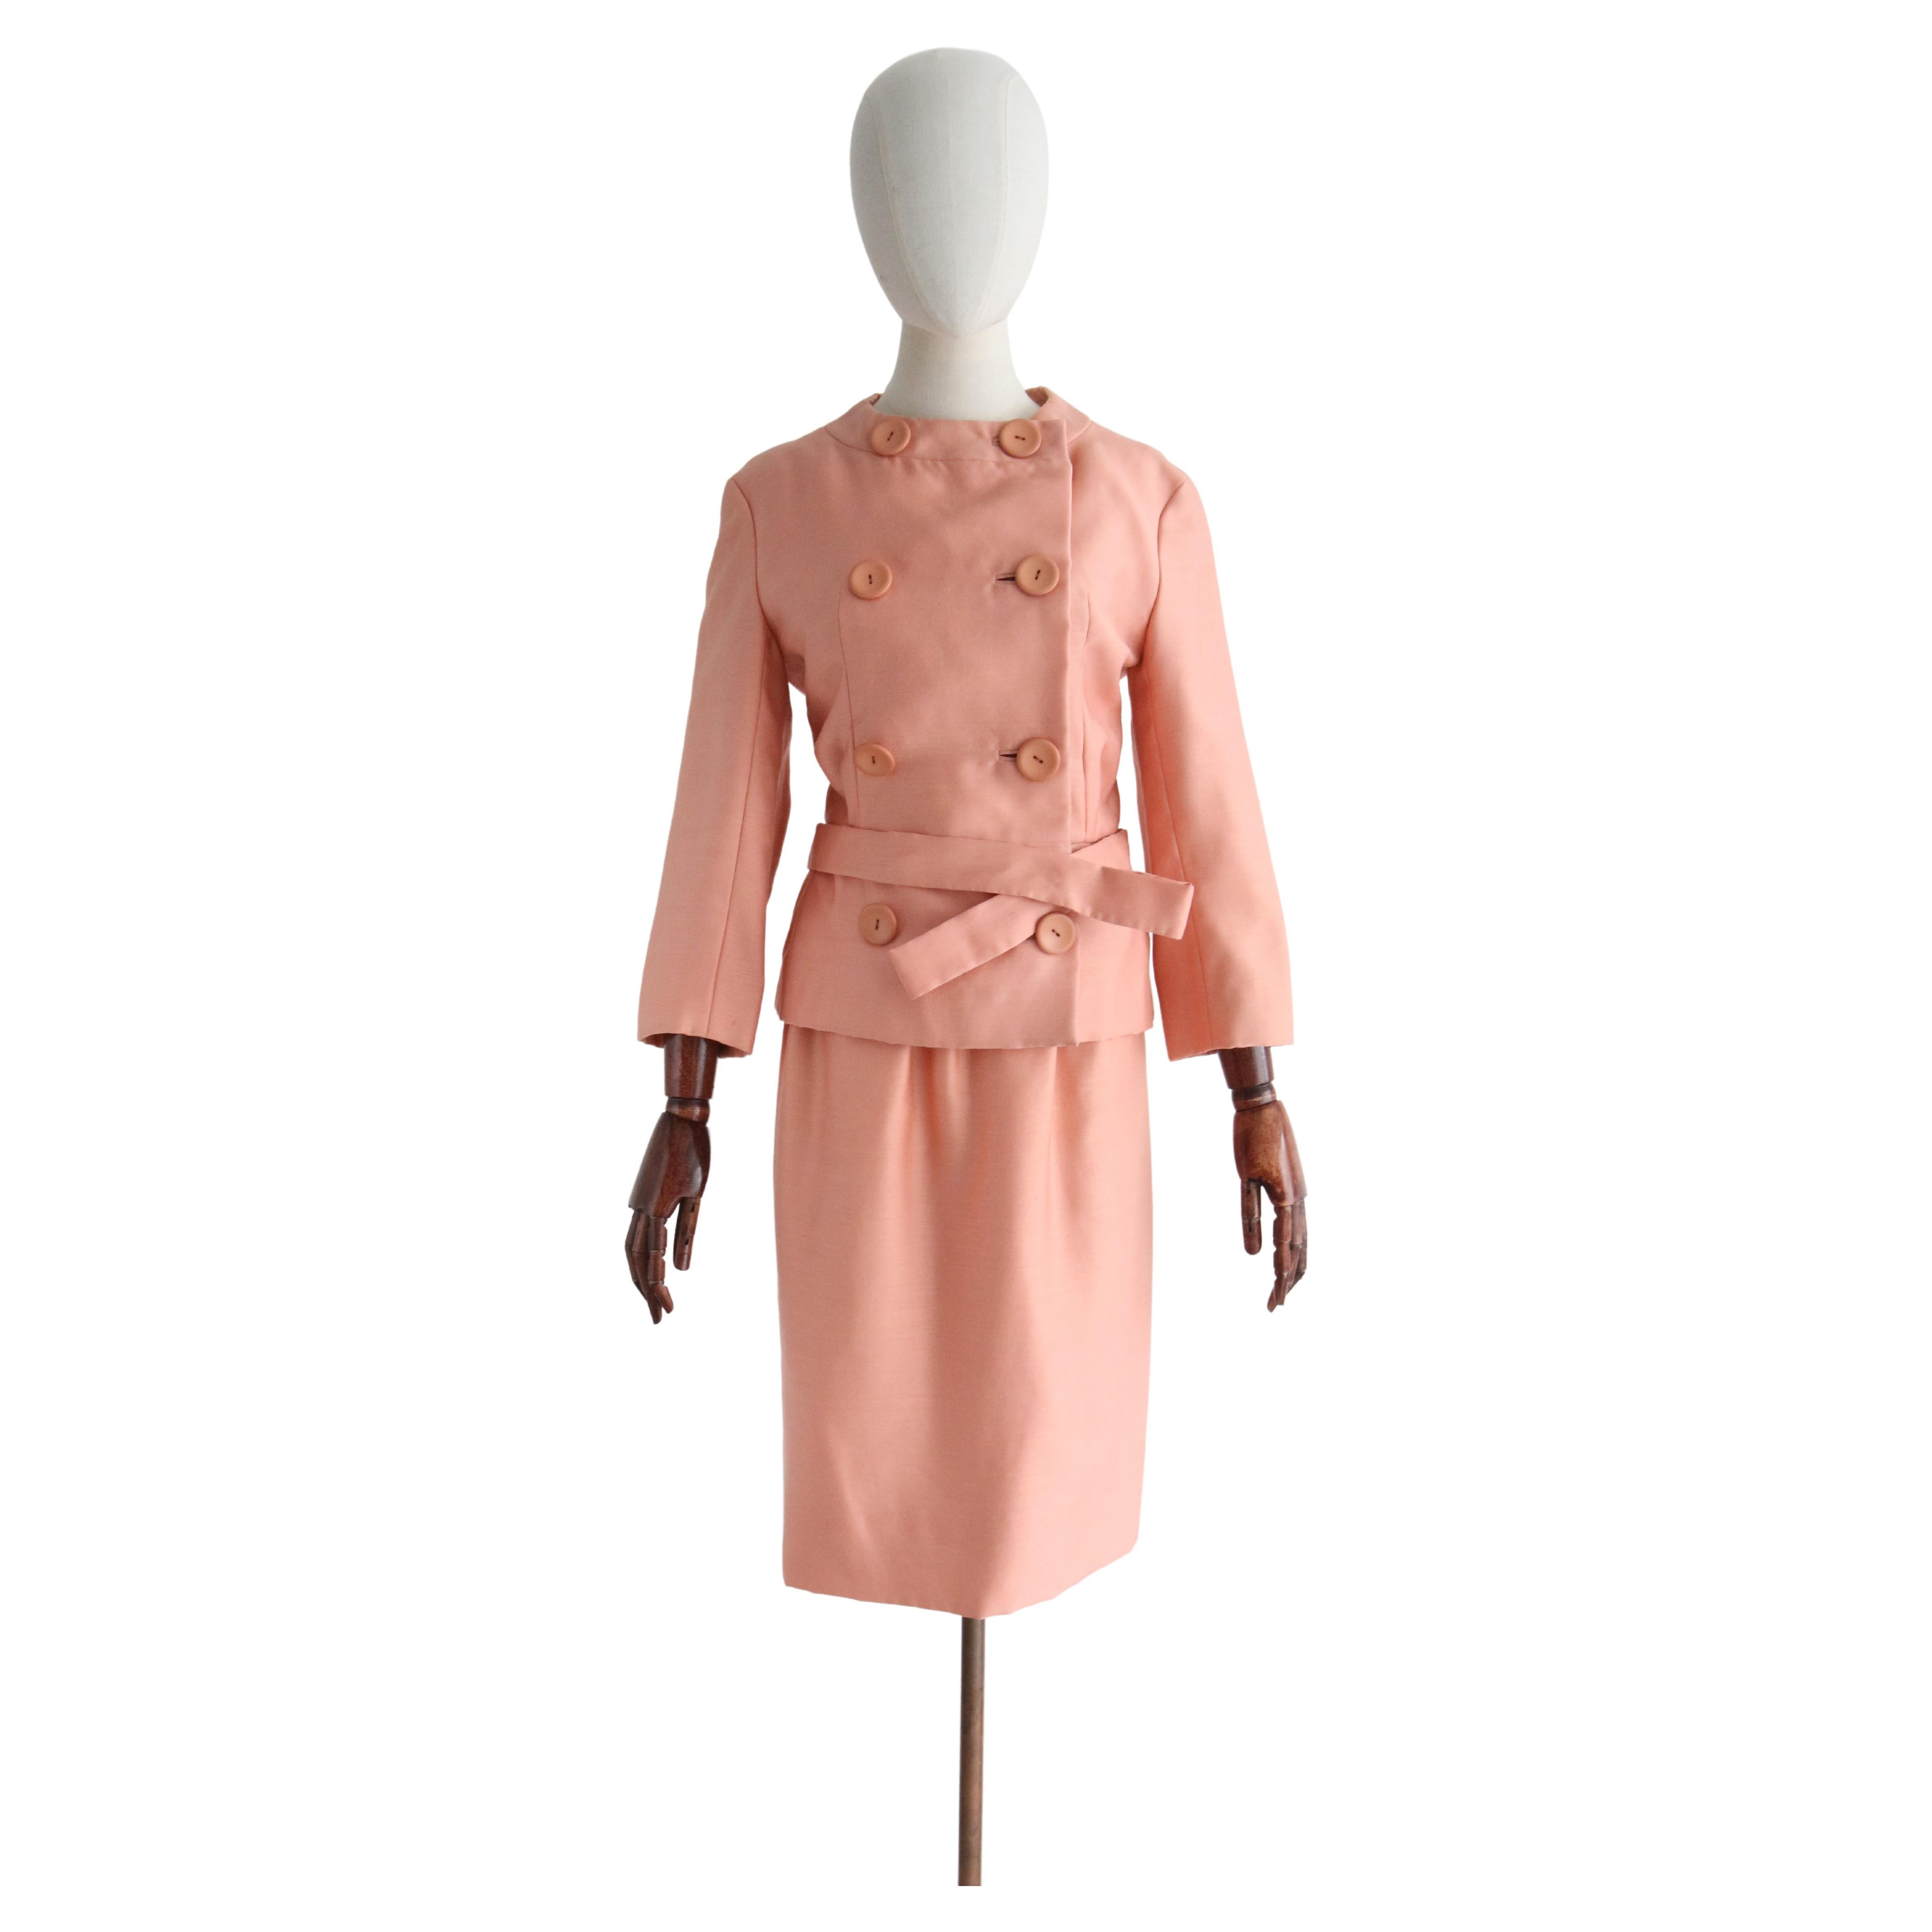 Vintage 1960's Christian Dior Peach Pink Silk Skirt Suit UK 6 US 2 For Sale